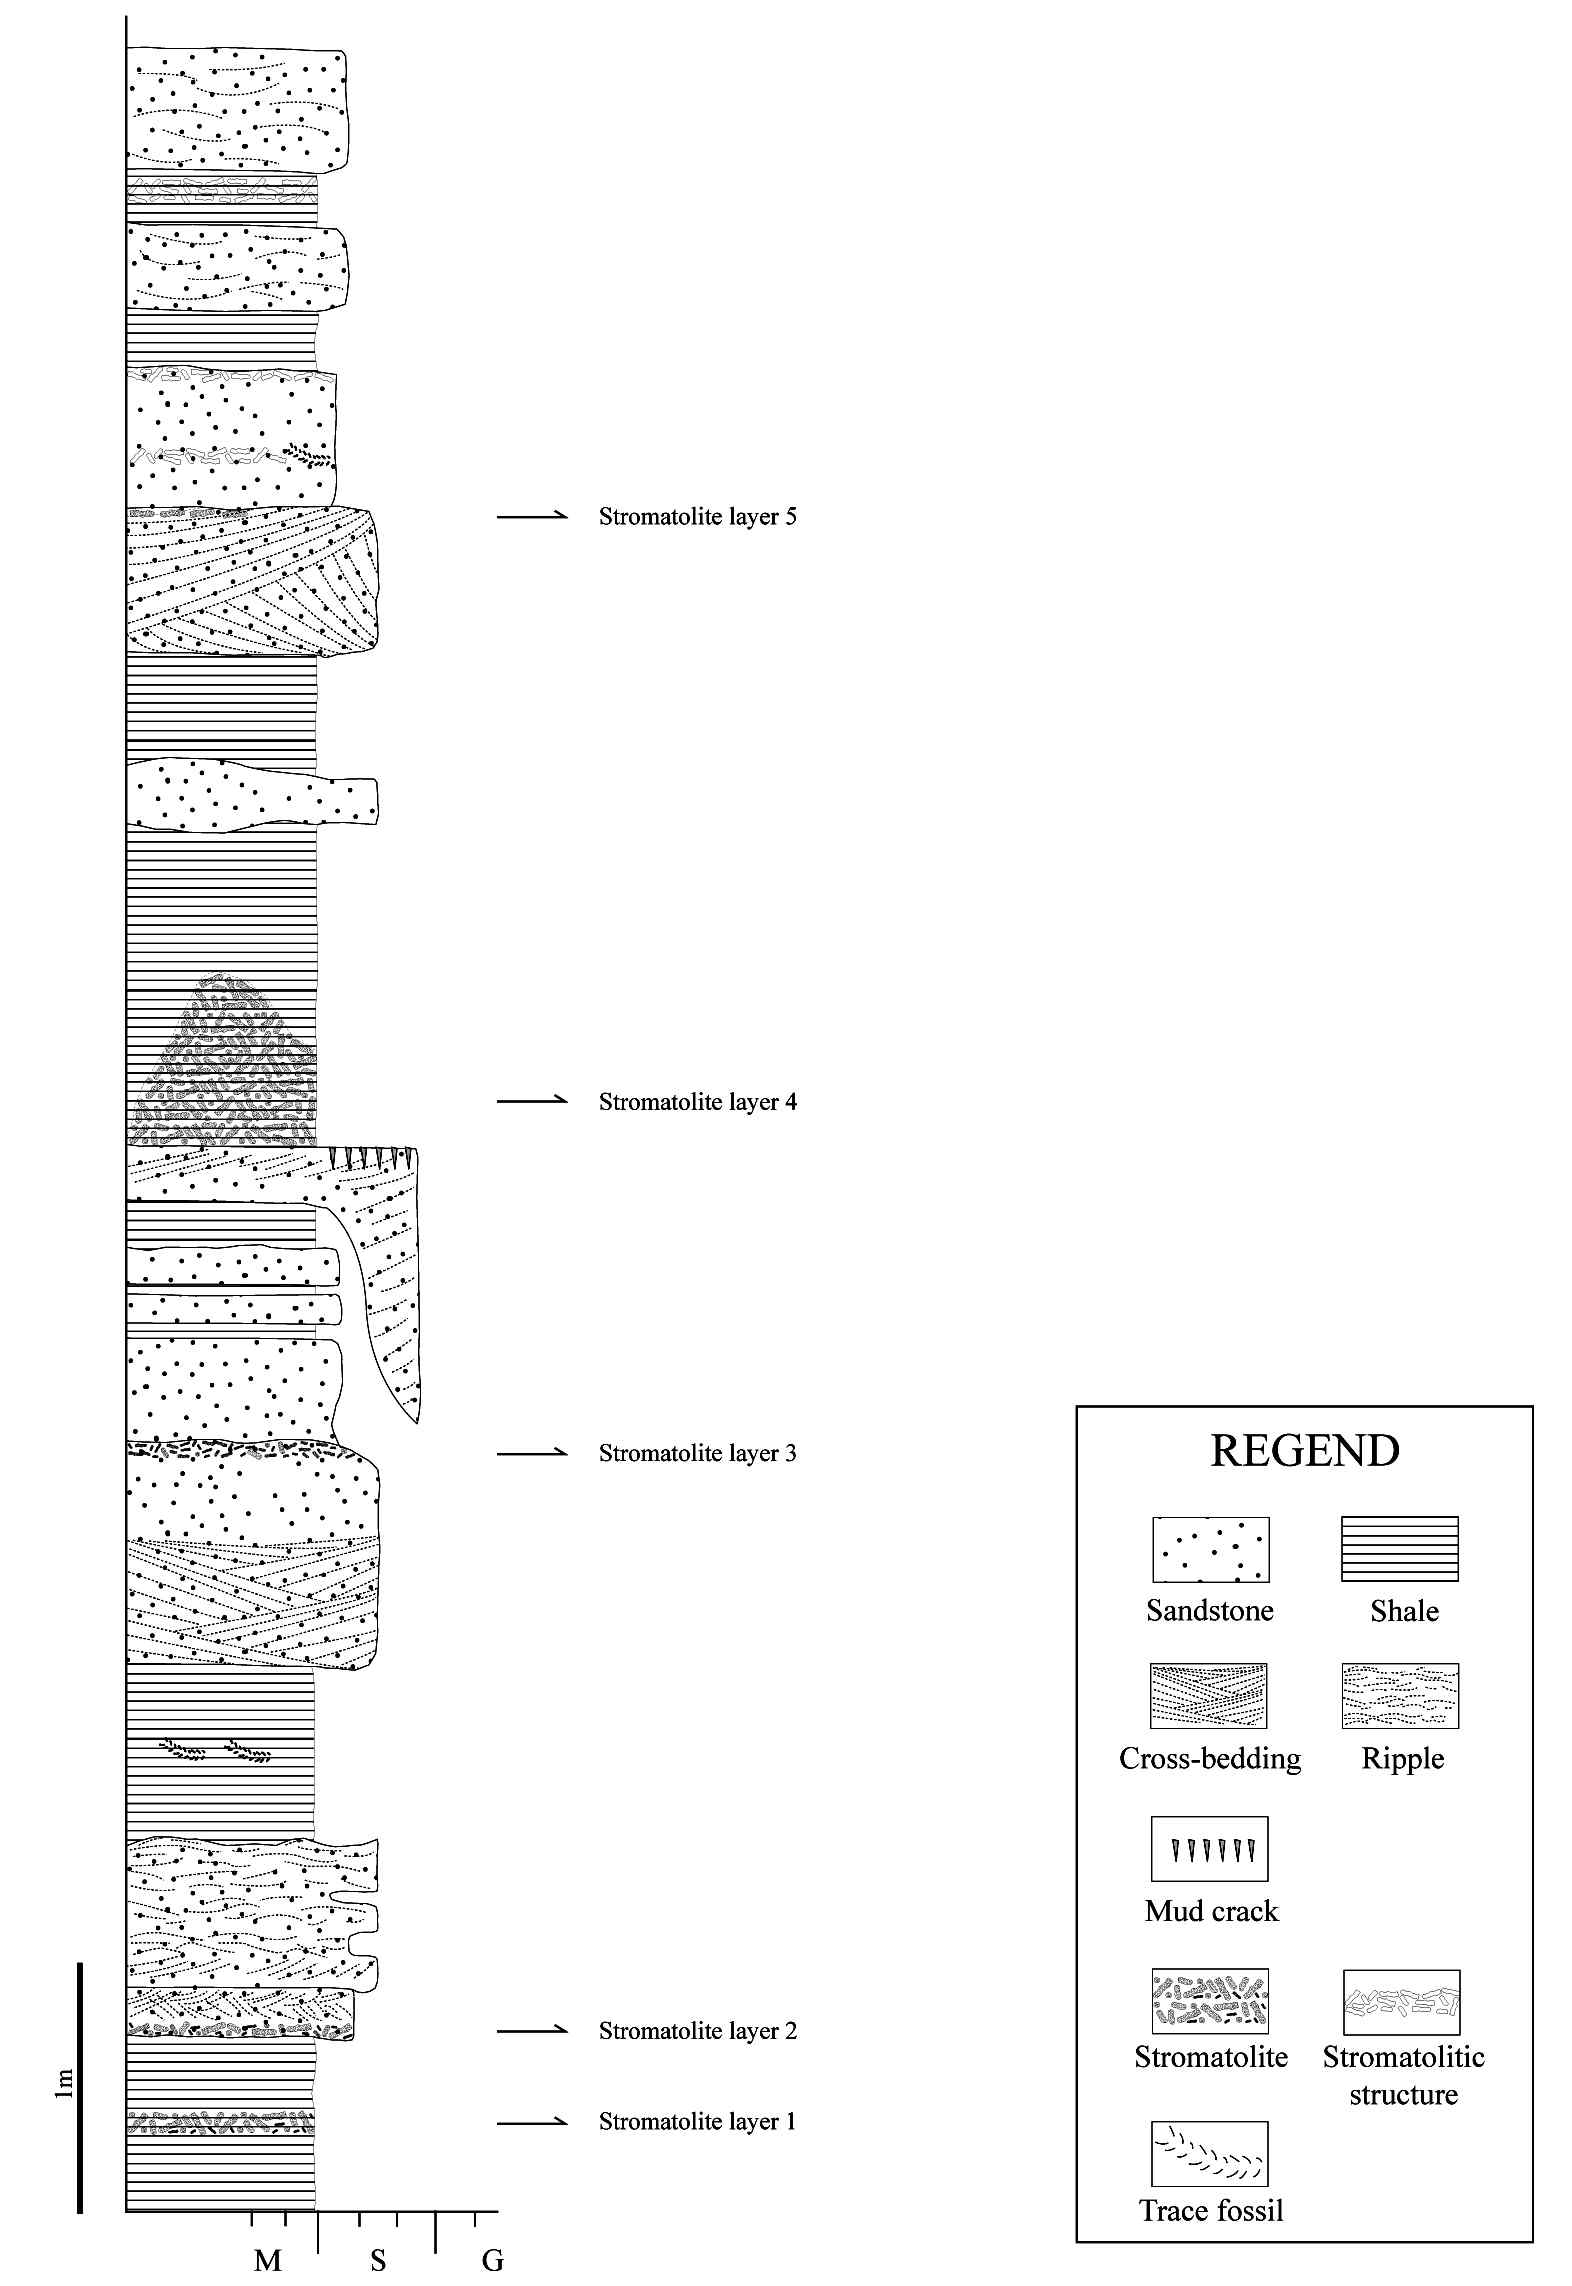 Fig. 4. Detailed columnar section of Seonjeon-ri outcrop containing a thick RSS bed. Lithology and diversified sedimentary structures are described. A total of 5 RSS beds are identified. Note a 50 cm RSS bed are overlain by coarse and cross-bedded sediments